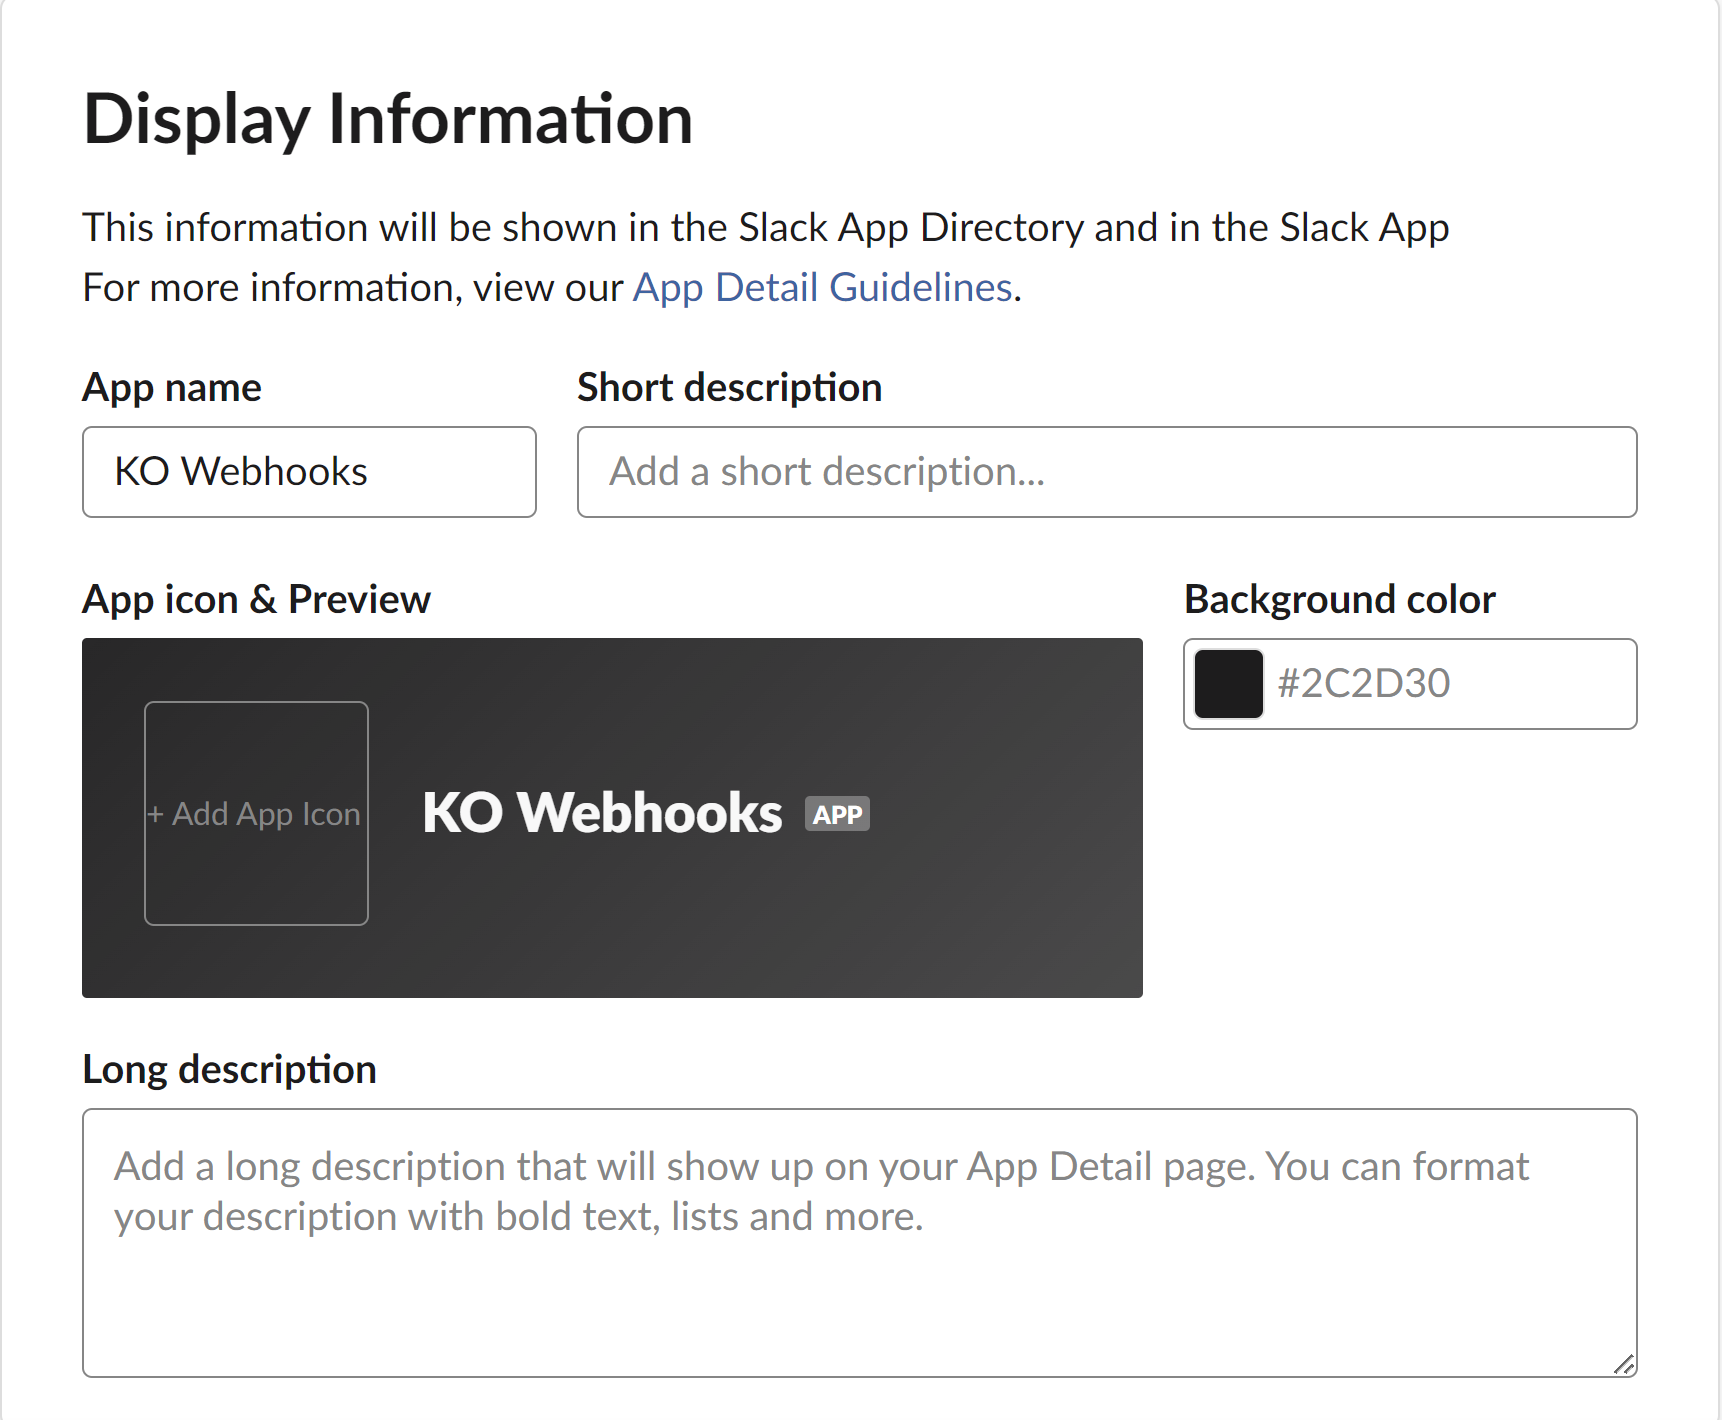 A screenshot of the Display Information section for the Slack app